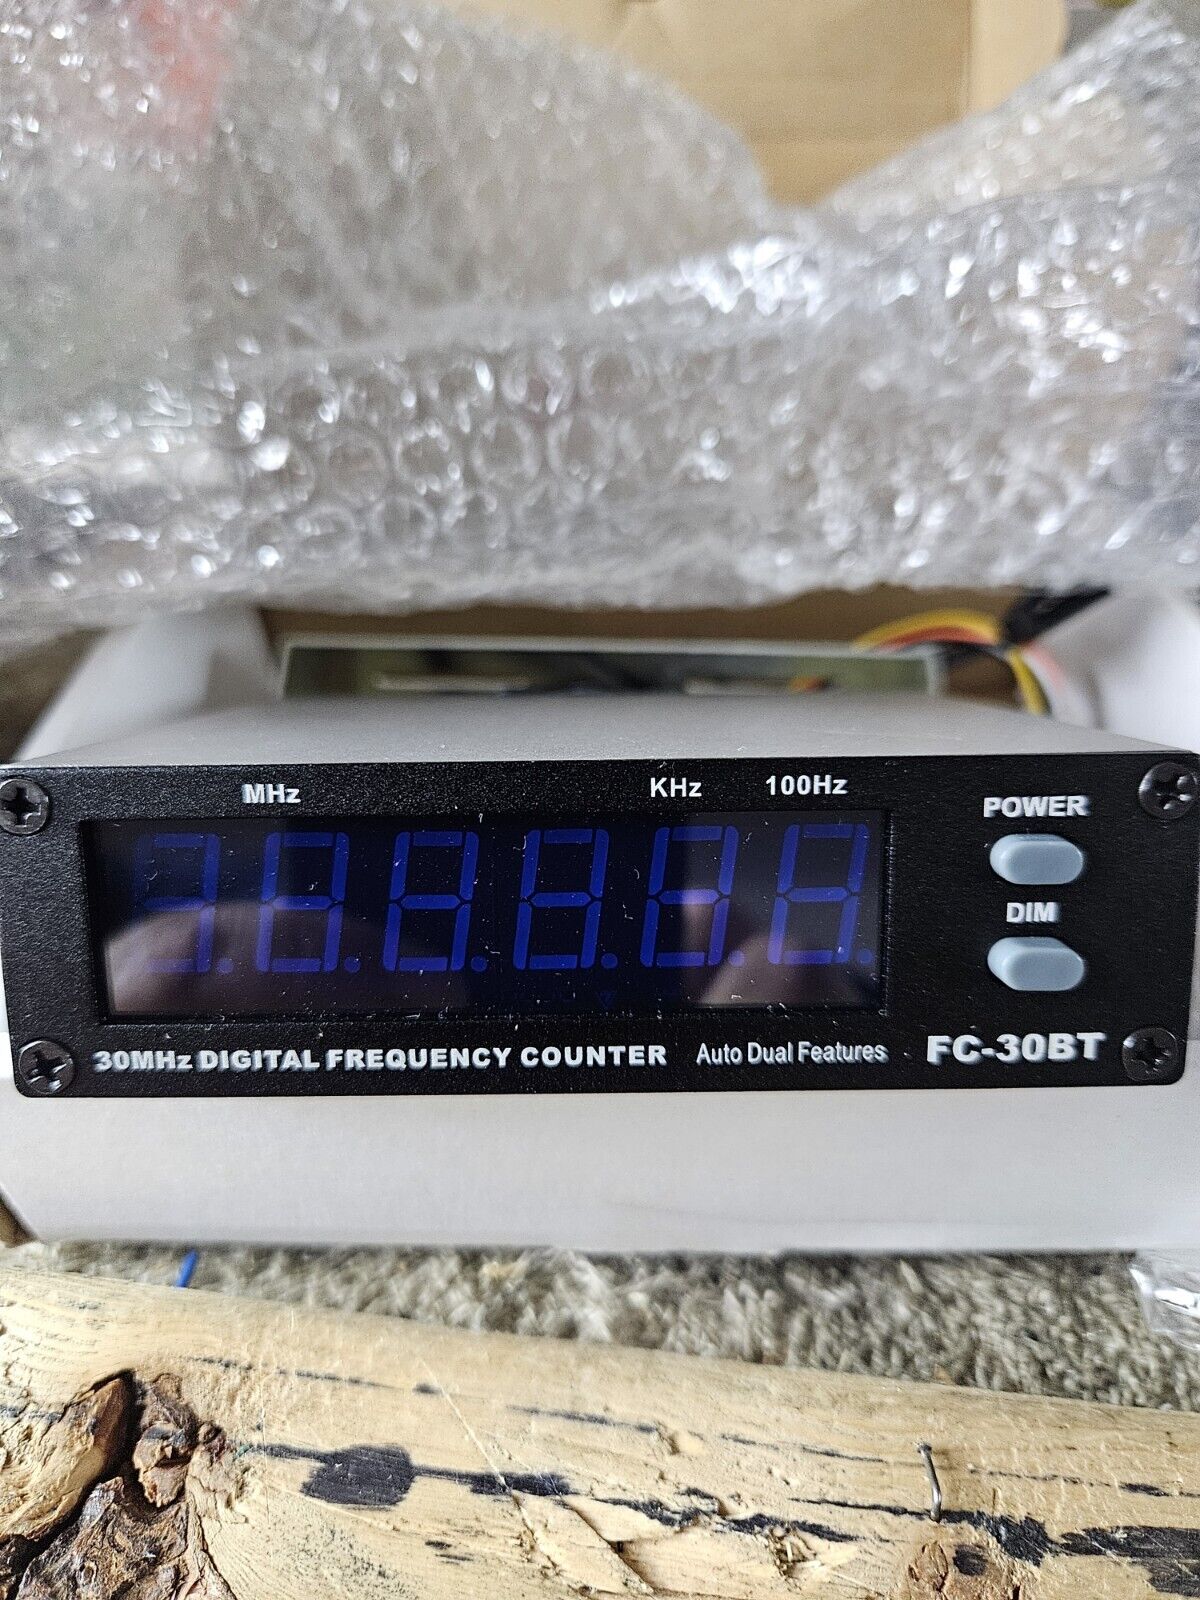 Frequency Counter FV-30 RT FC-30 BT 